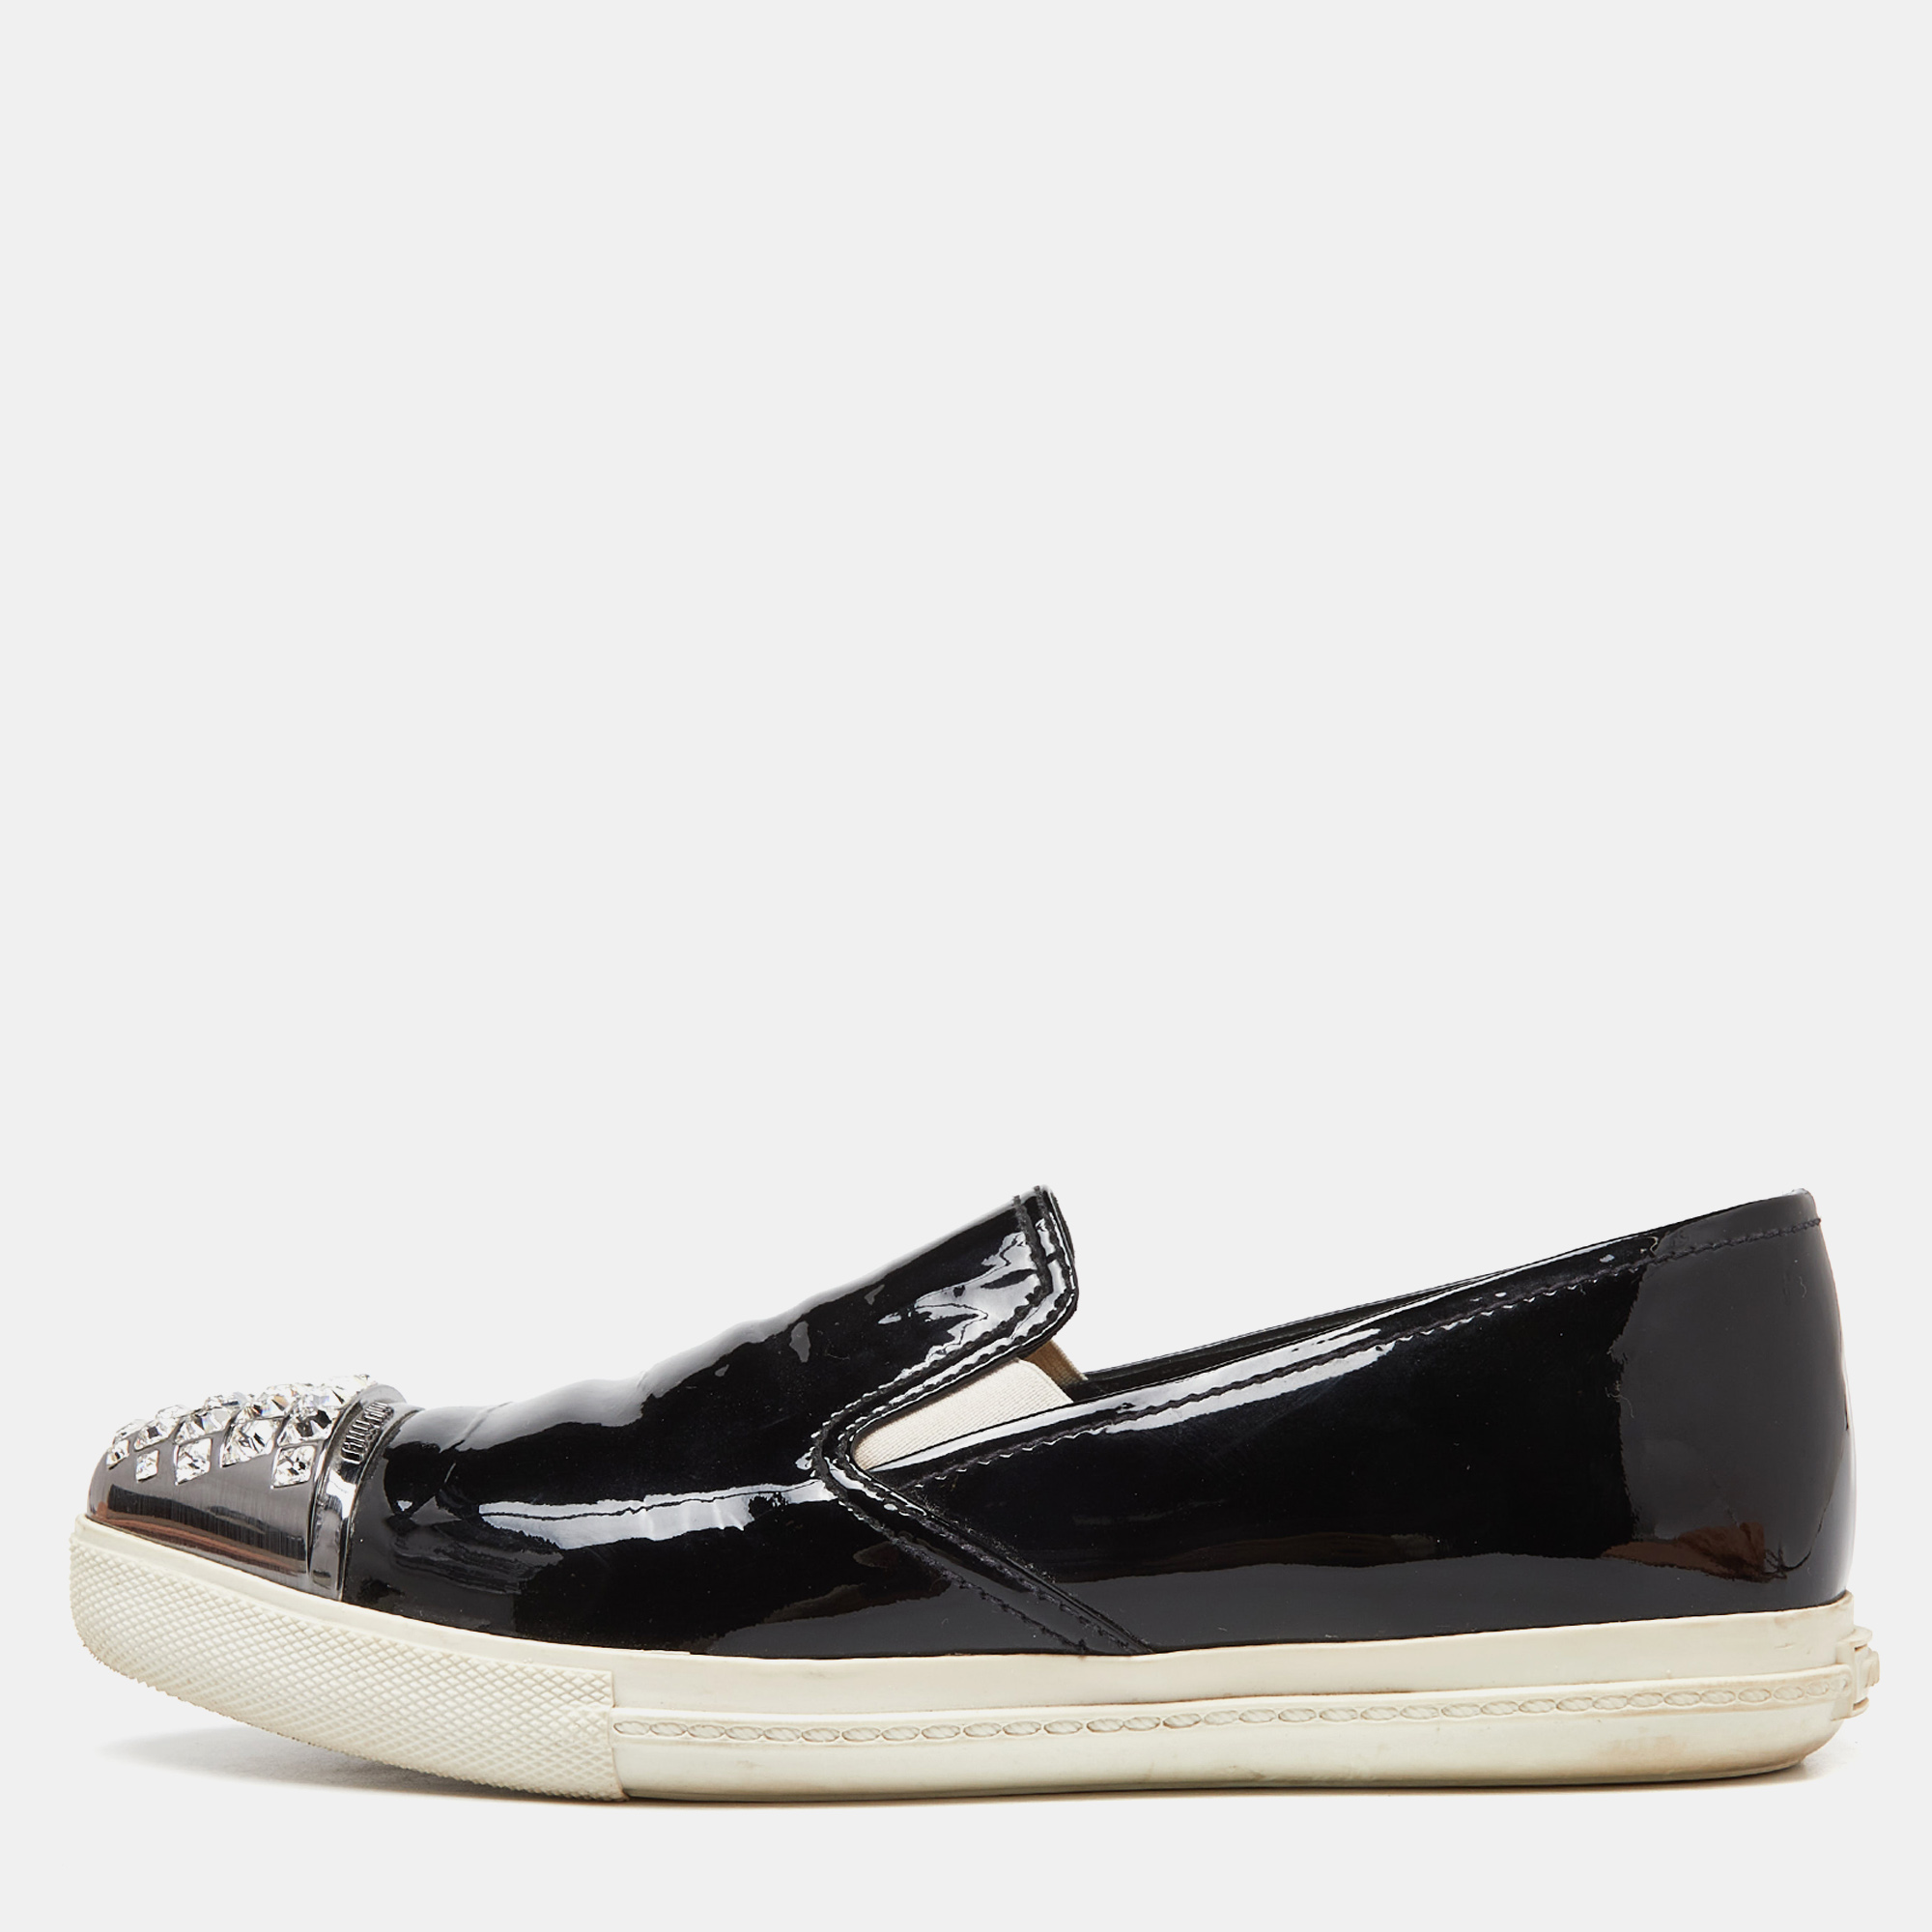 Pre-owned Miu Miu Black Patent Leather Crystals Embellished Slip On Loafers Size 38